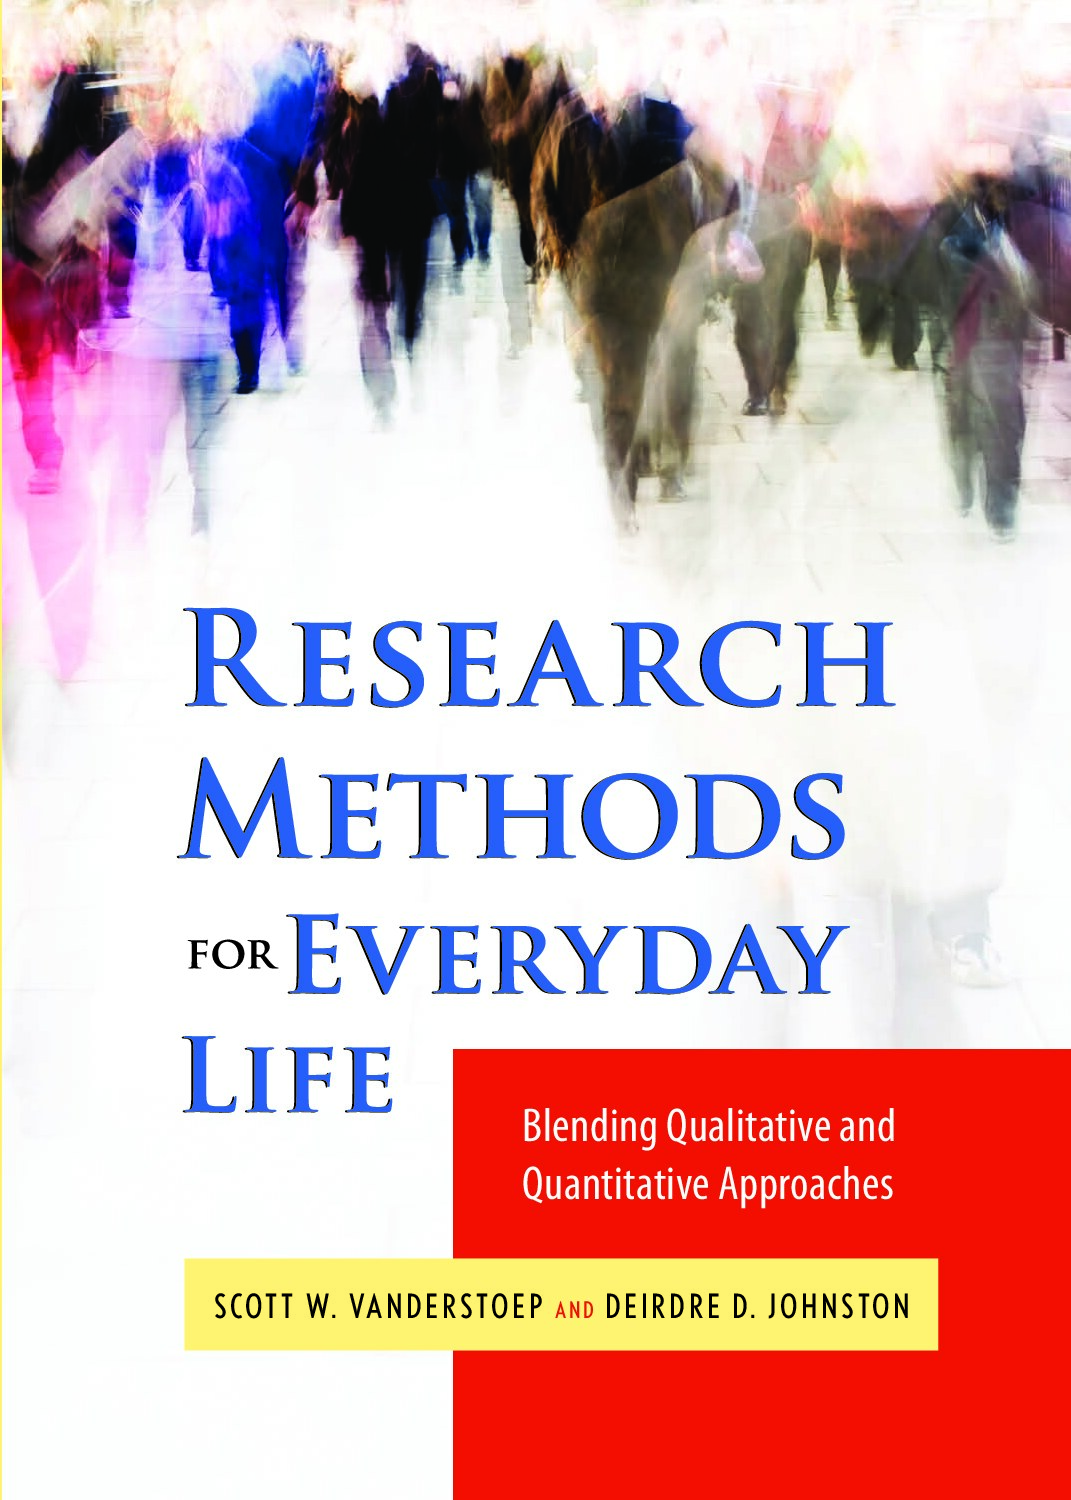 Research Methods for Everyday Life: Blending Qualitative and Quantitative Approaches